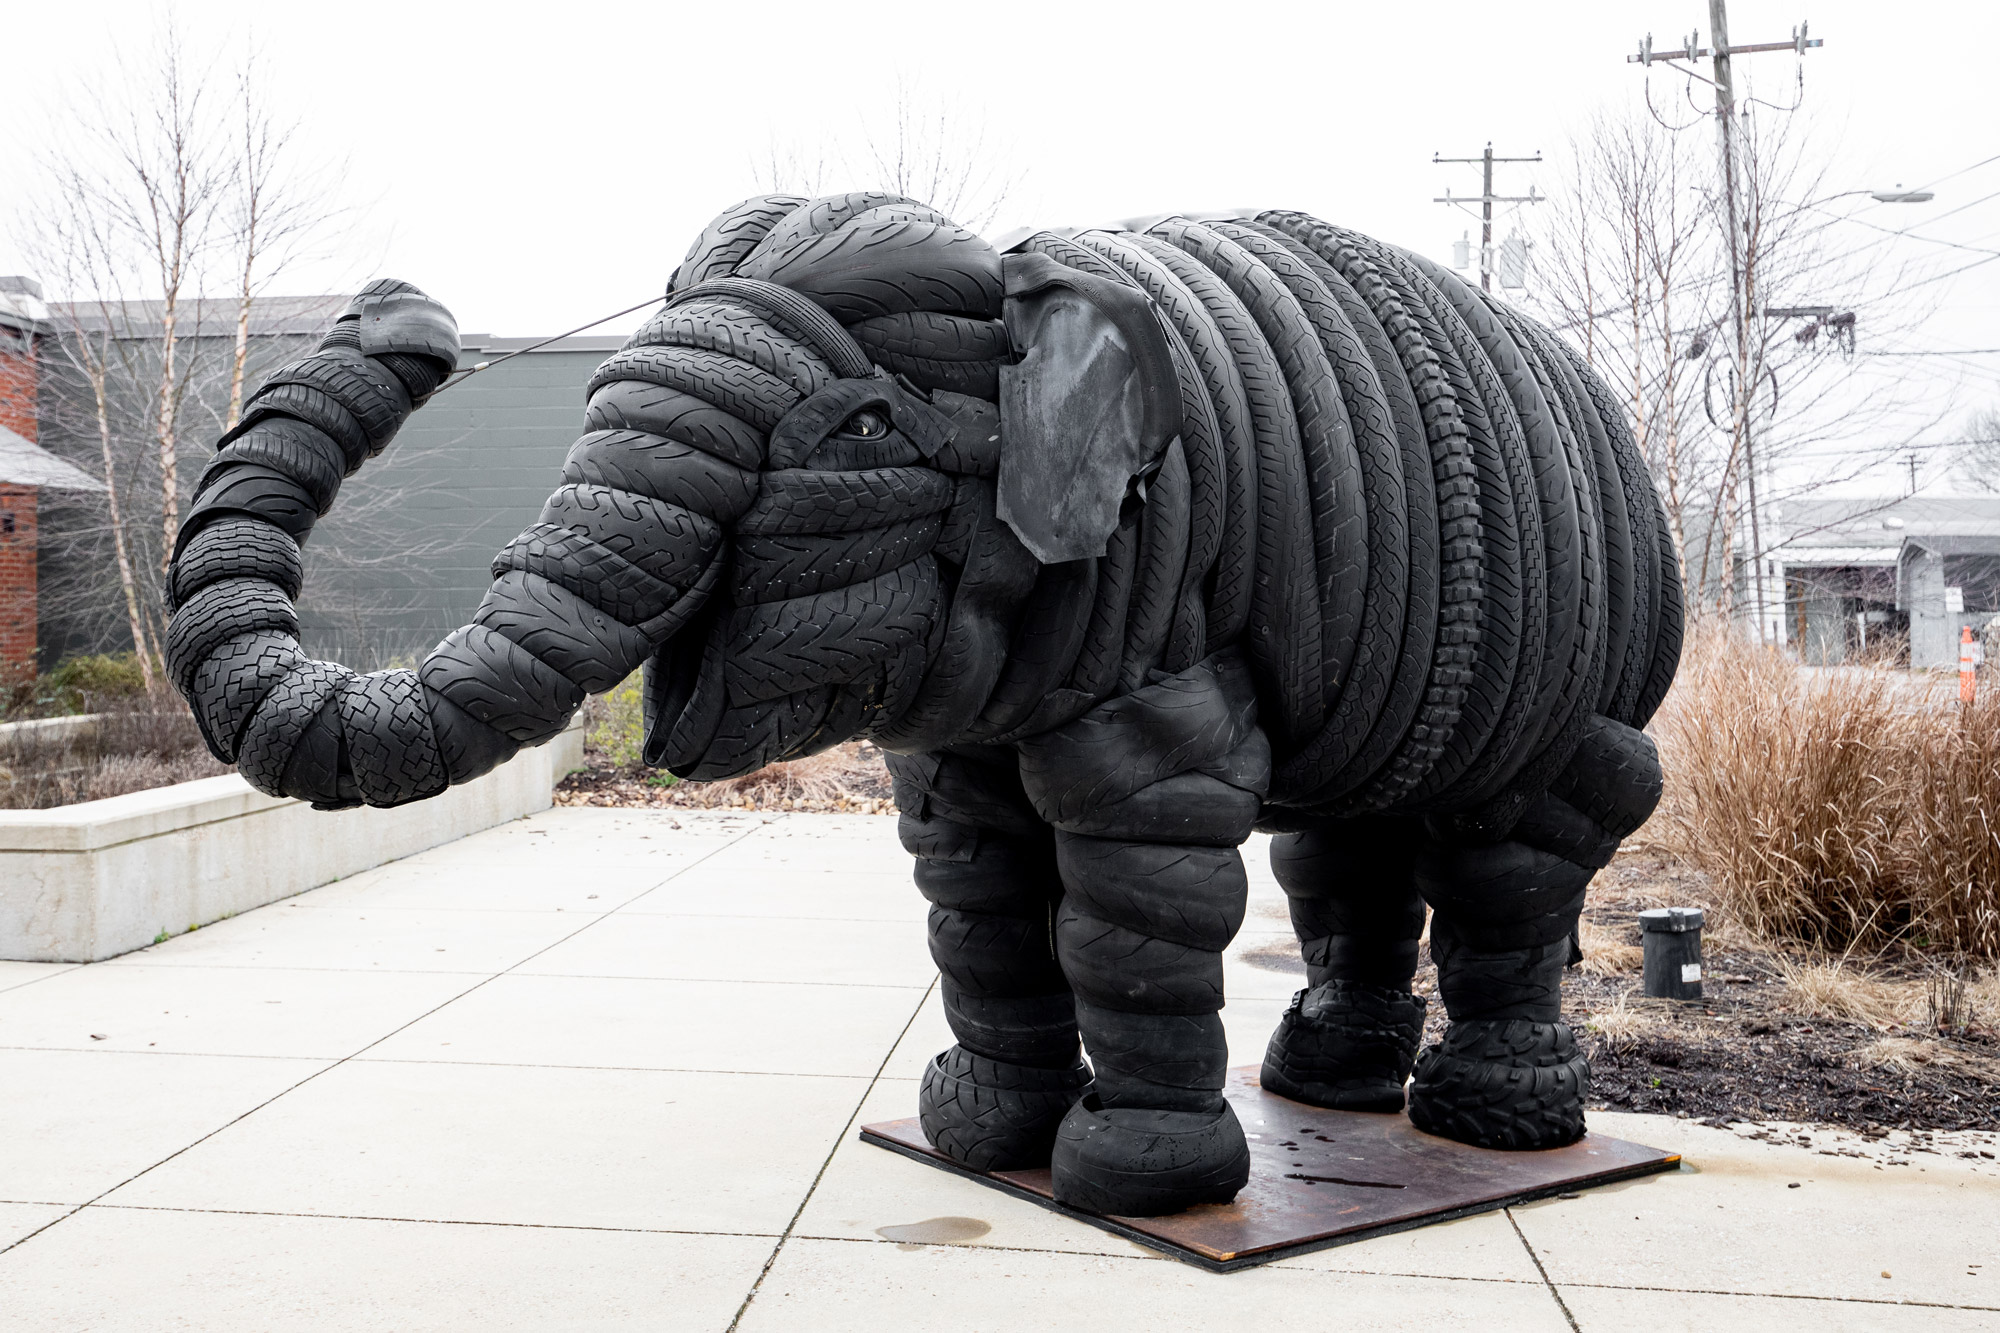 A sculpture of an elephant made of recycled used tires